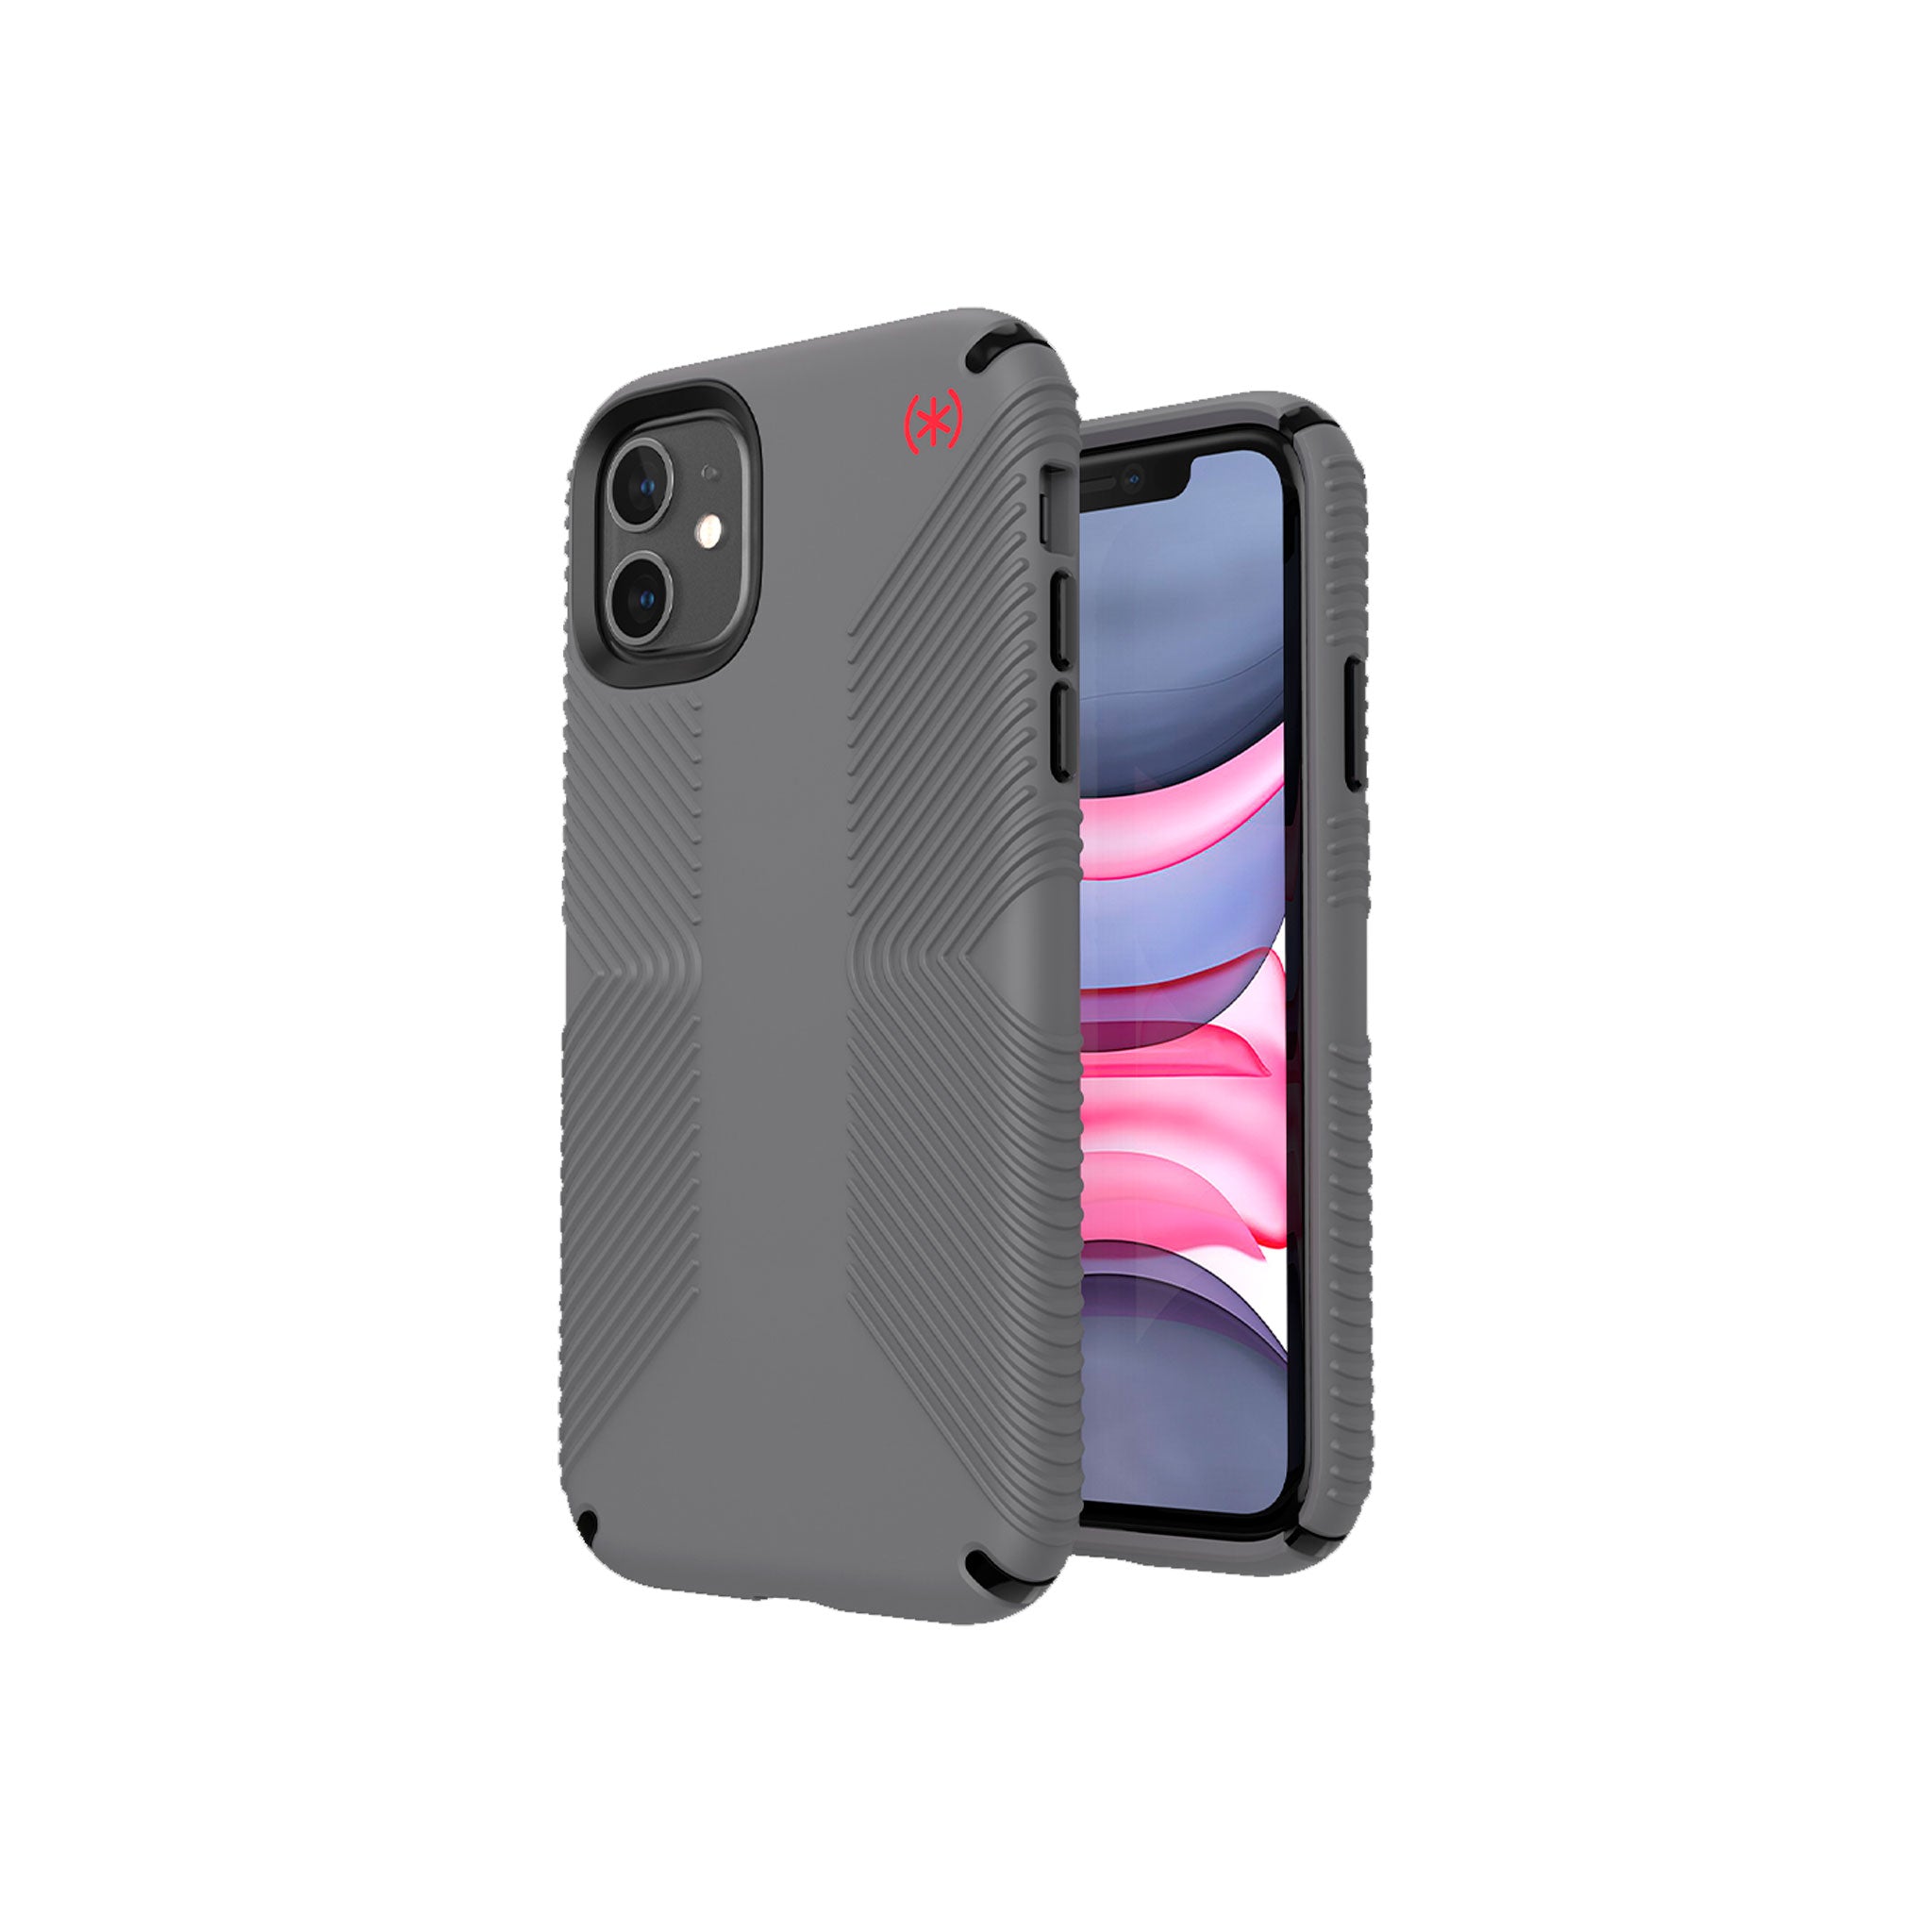 Speck - Presidio2 Grip Case For Apple Iphone 11 - Graphite Grey And Cathedral Grey